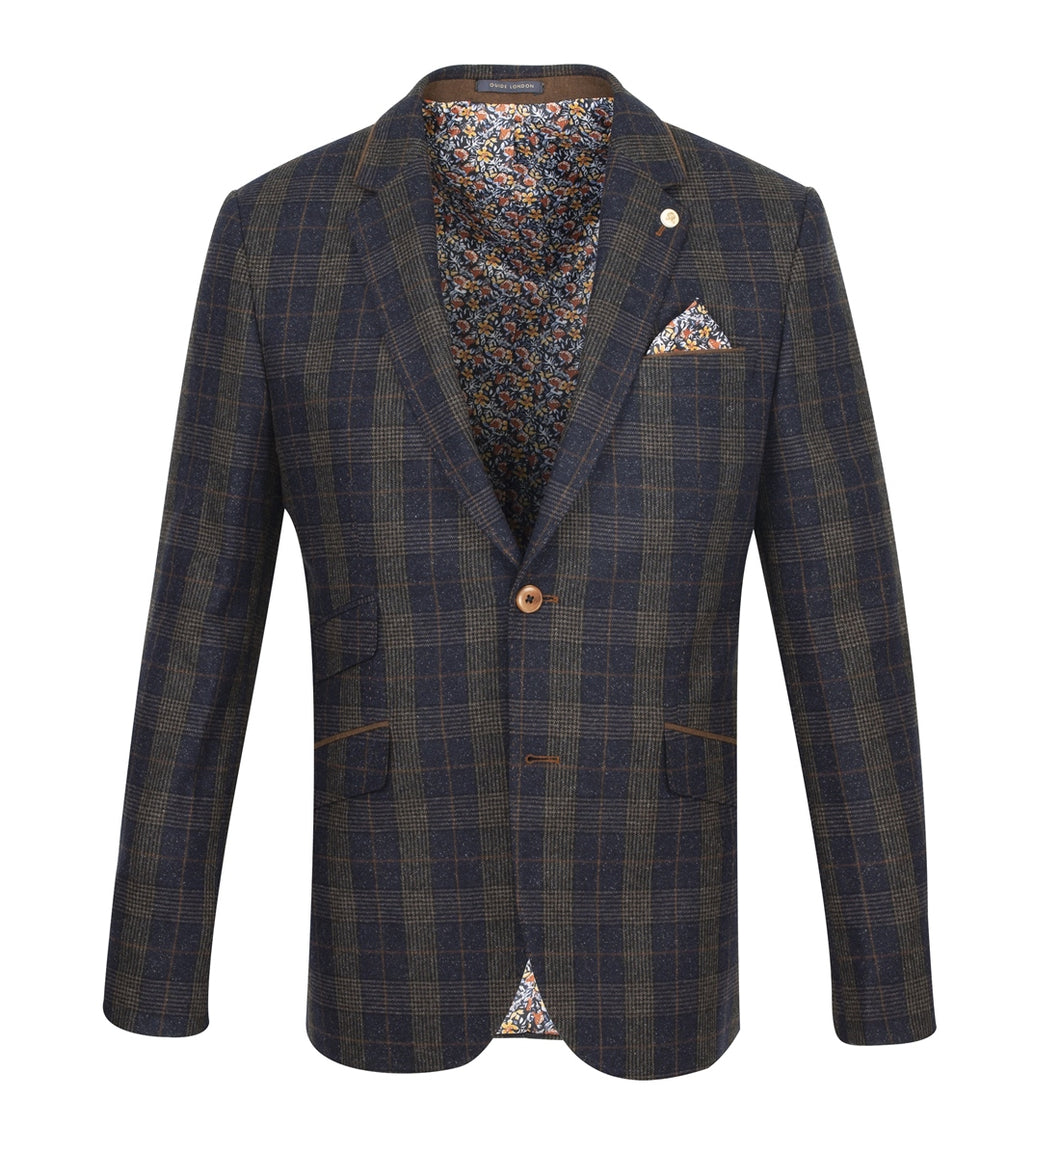 Guide London Navy Check Jacket with Tan Trim